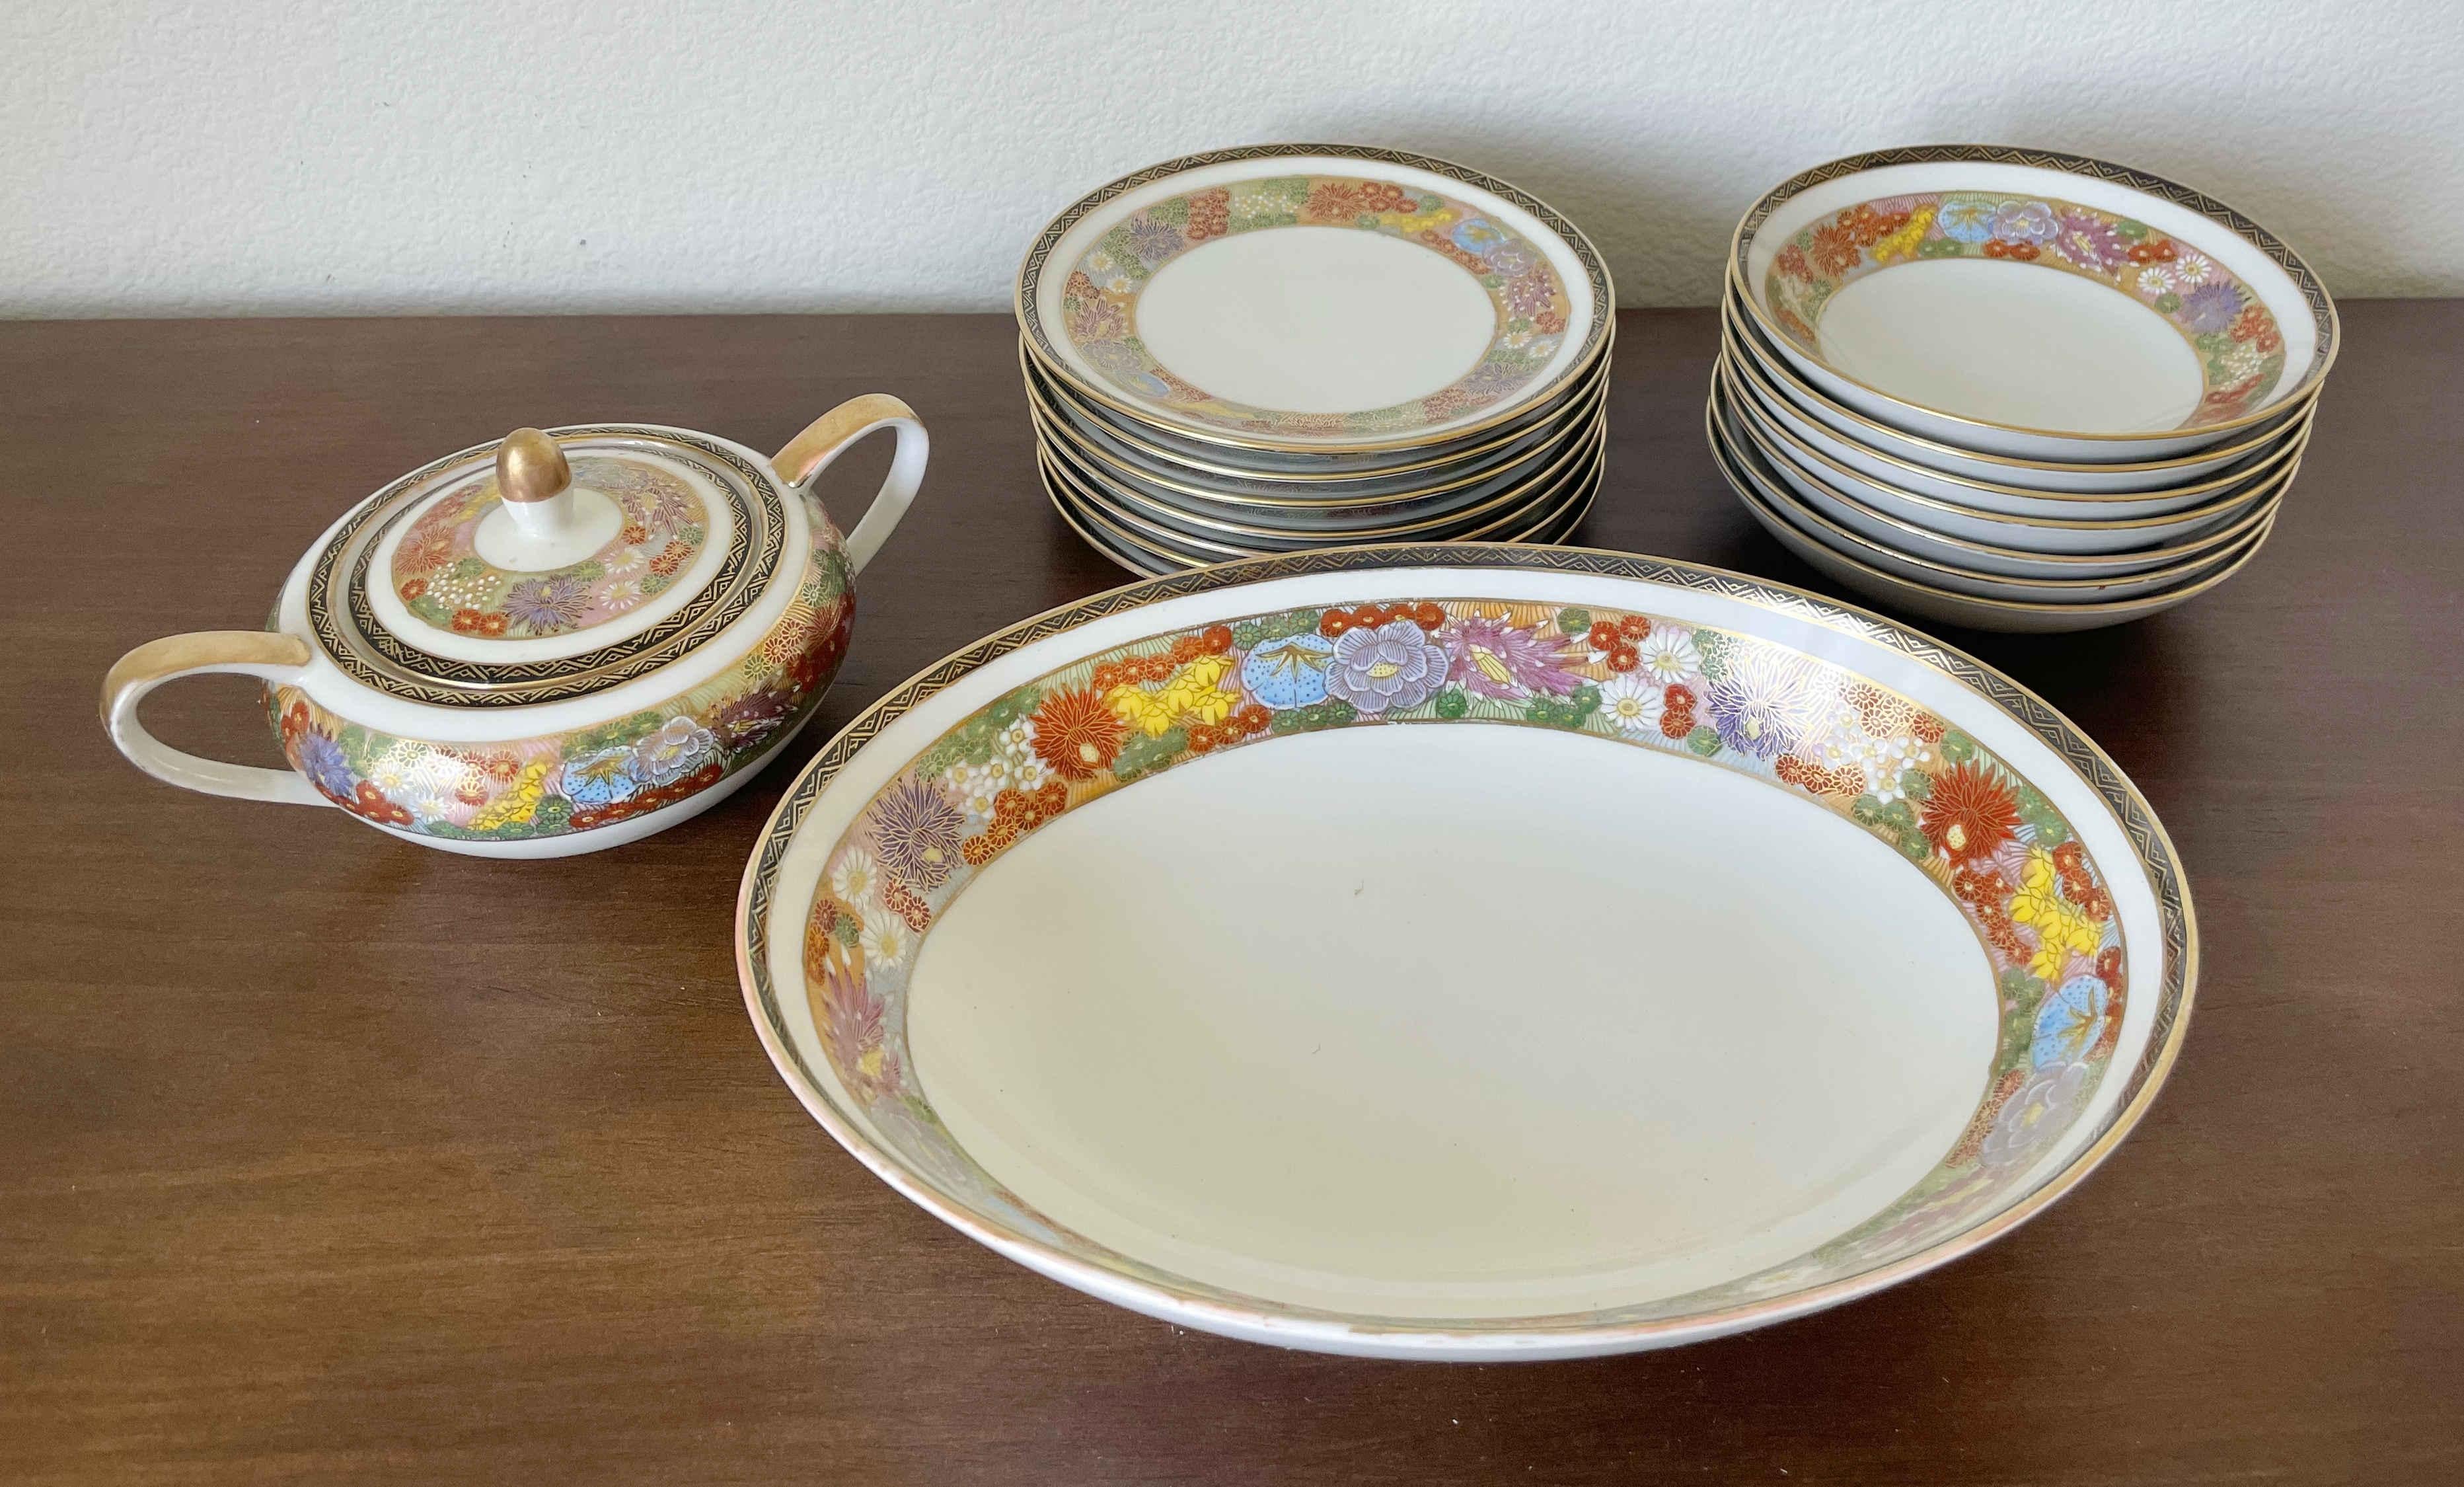 Vintage Koshida sumatsu serving set hand painted in floral pattern / Made in Japan circa 1960s
1 sugar bowl, width 7 inches, height 5 inches, depth 4 inches
1 oval platter, width 10.5 inches, depth 7.5 inches
7 plates, diameter 6.25 inches
7 bowls,